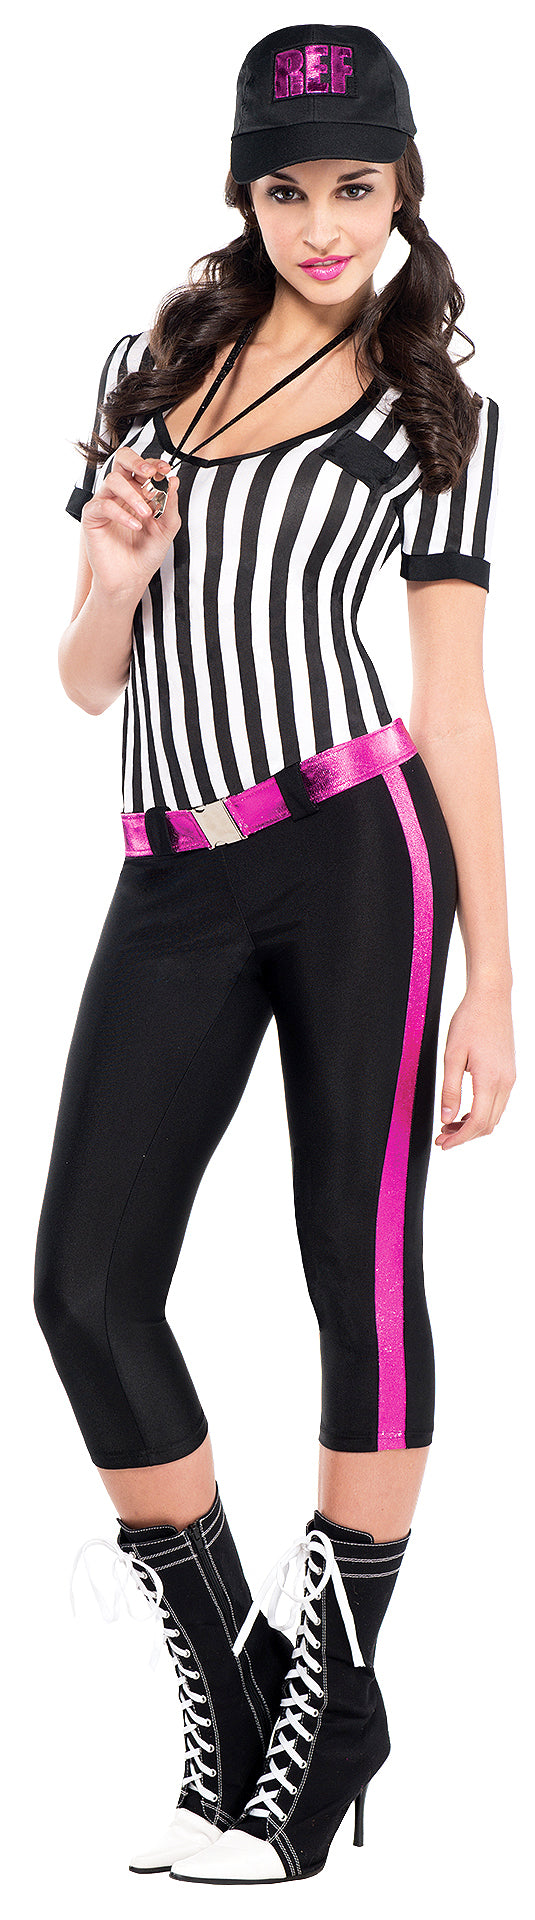 Instant Replay Referee Costume